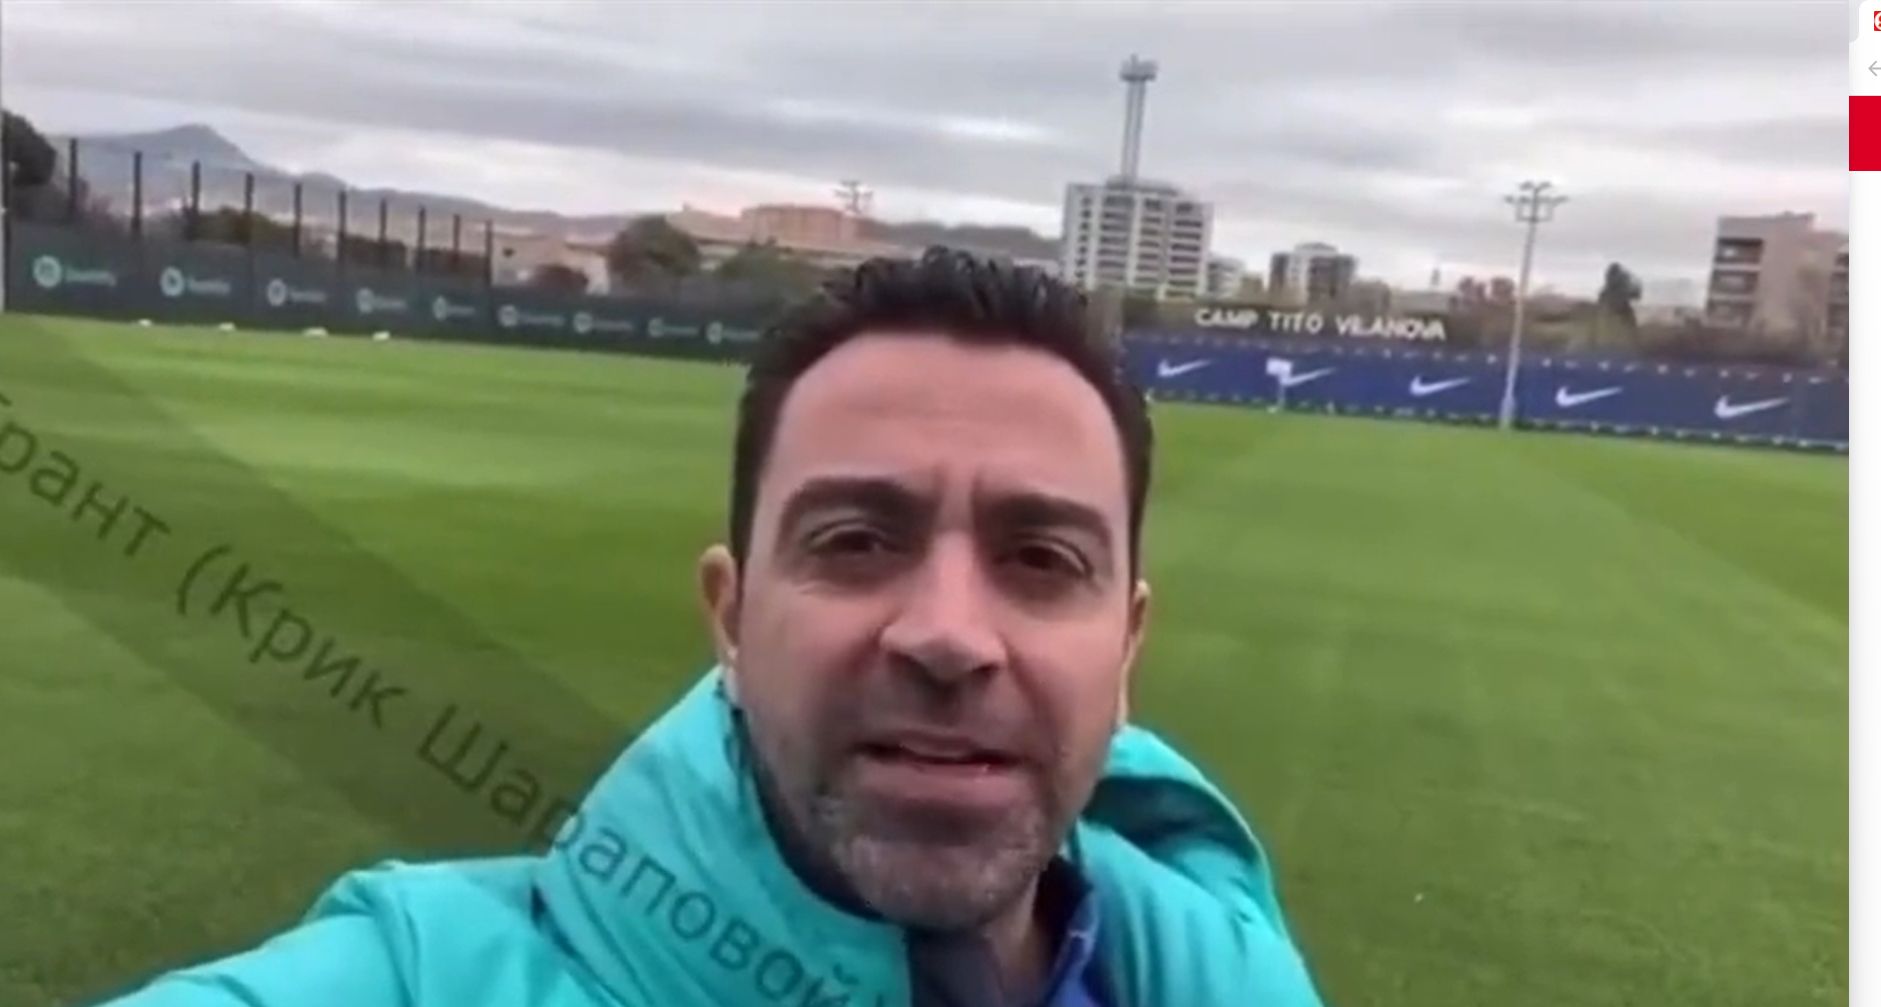 Barcelona miss out on midfield target as Xavi Hernandez invite video emerges